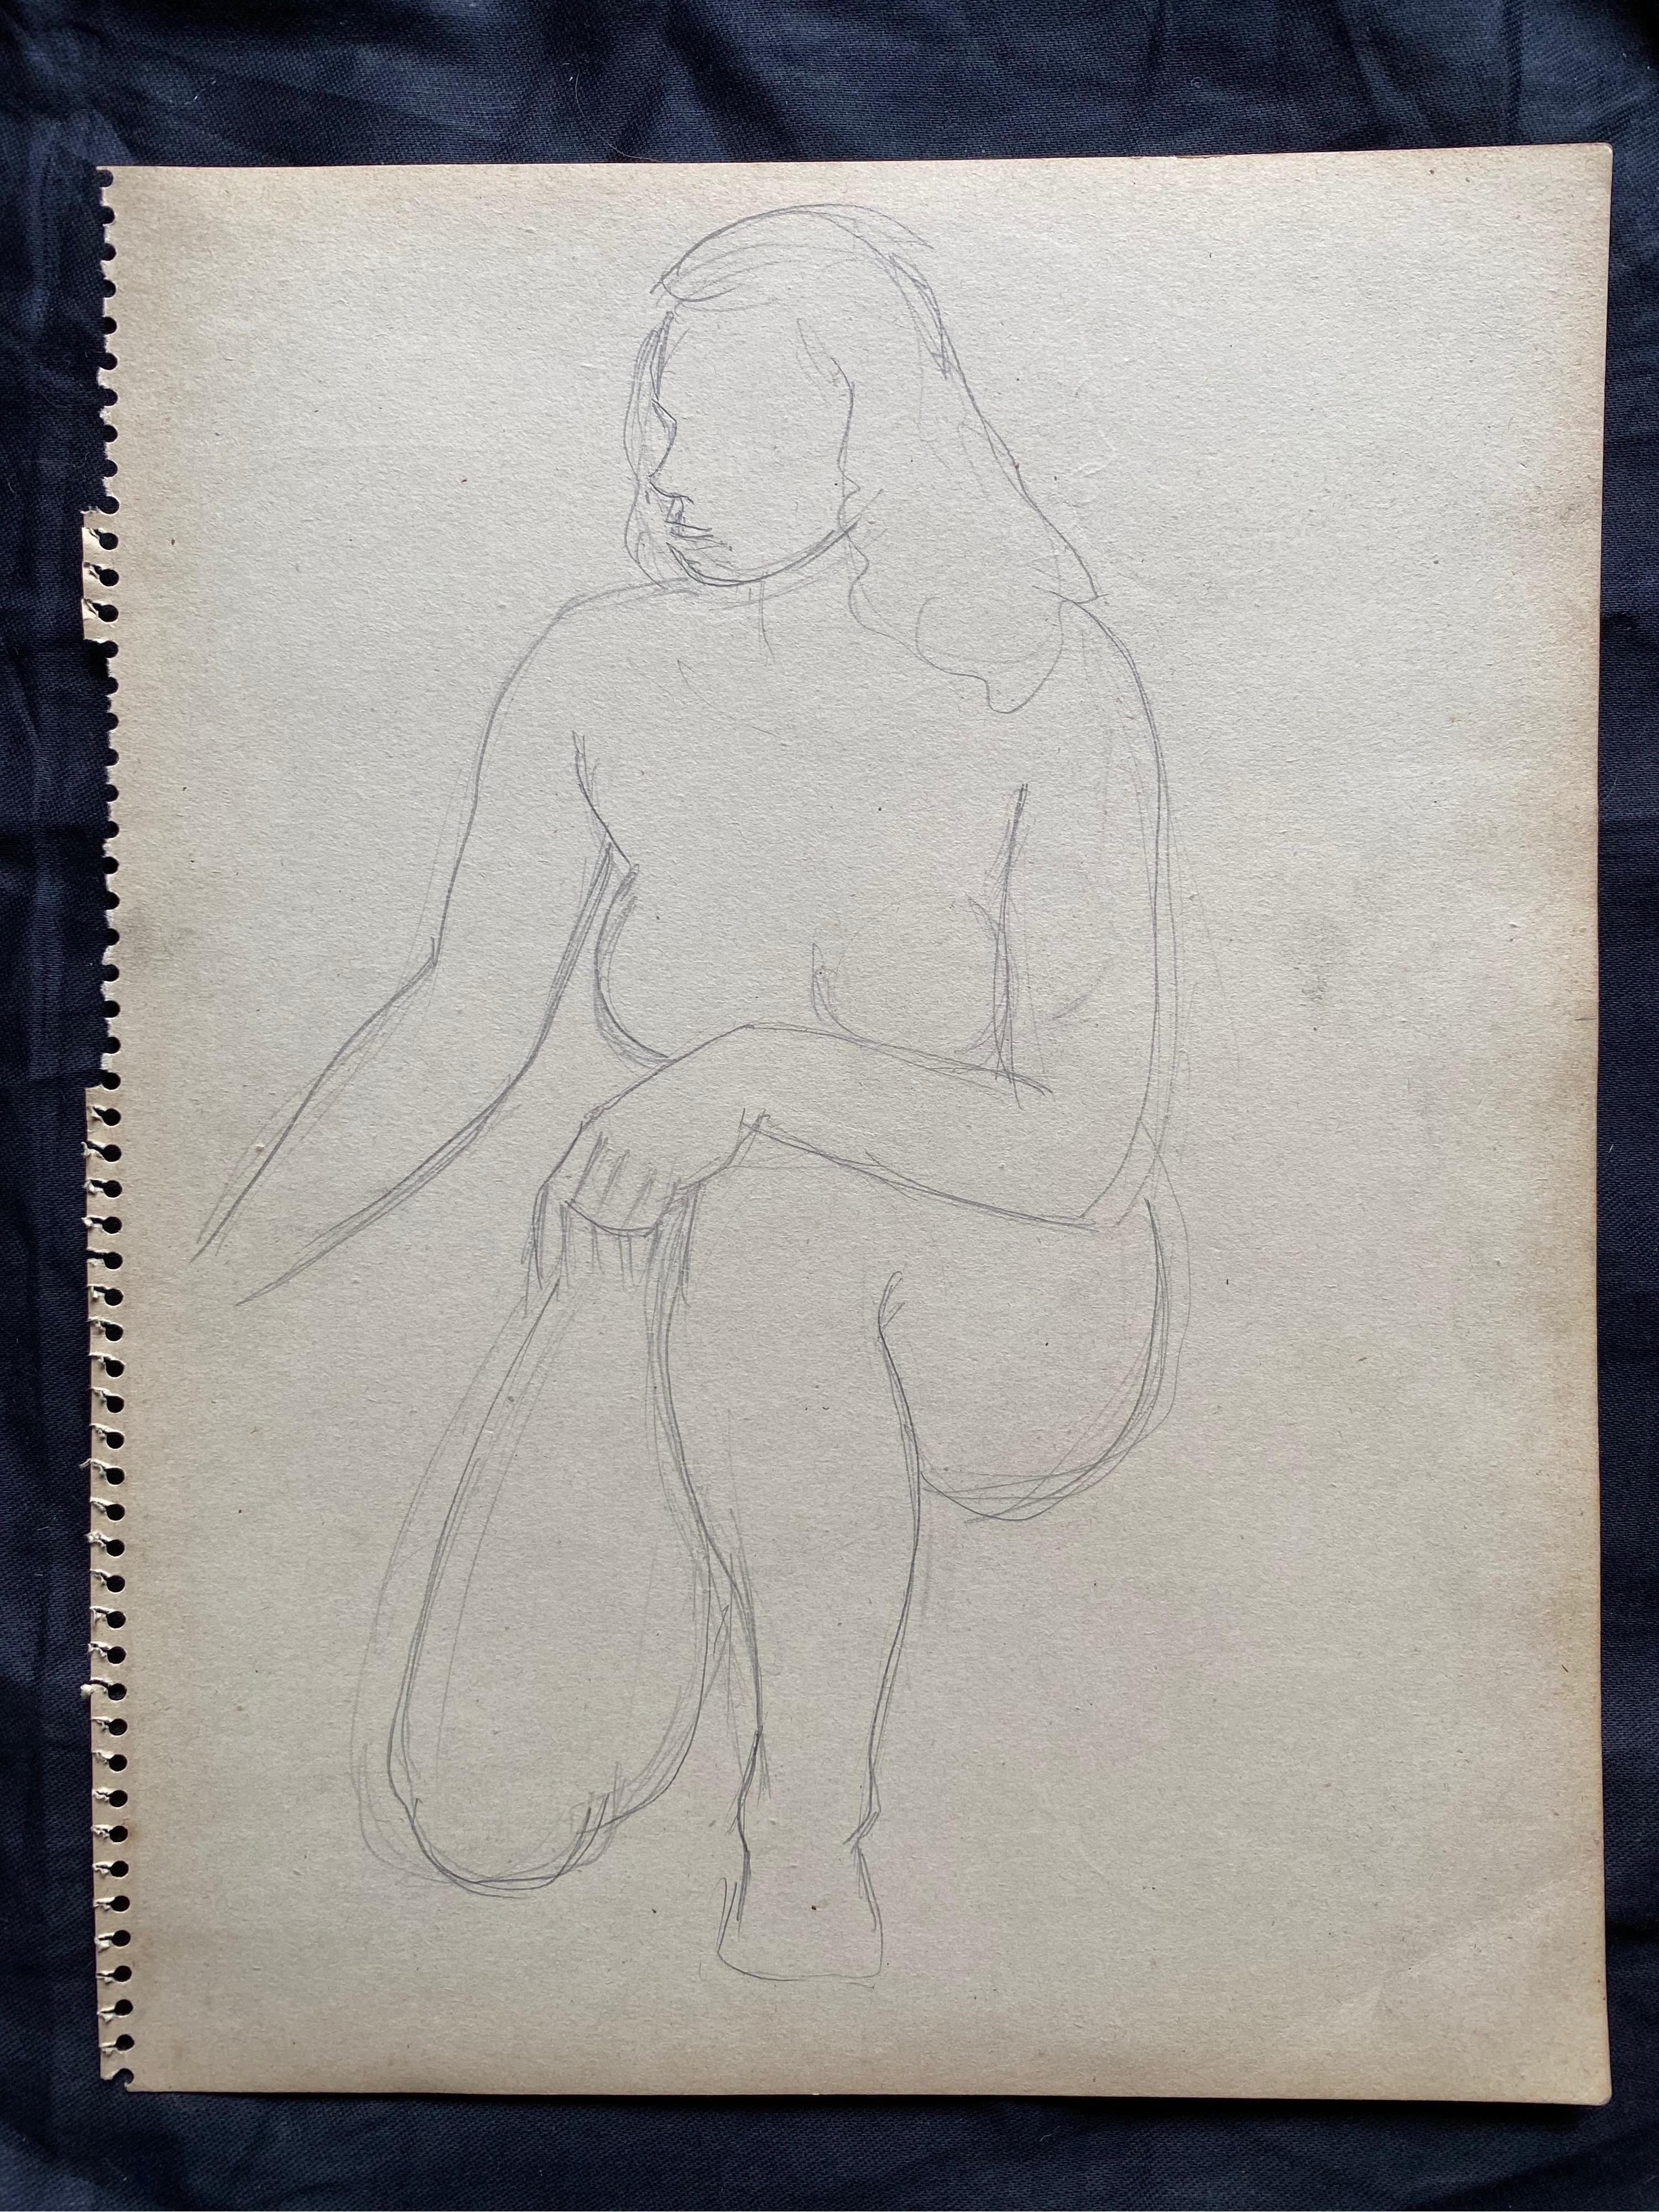 Portrait sketch
original drawing by Jean-Paul LE VERRIER (1922-1996)
studio stamped
inscribed verso
pencil drawing on paper, unframed
Double sided
10.5 x 8.25 inches

provenance: private collection of the artists work, Paris

Wonderful original